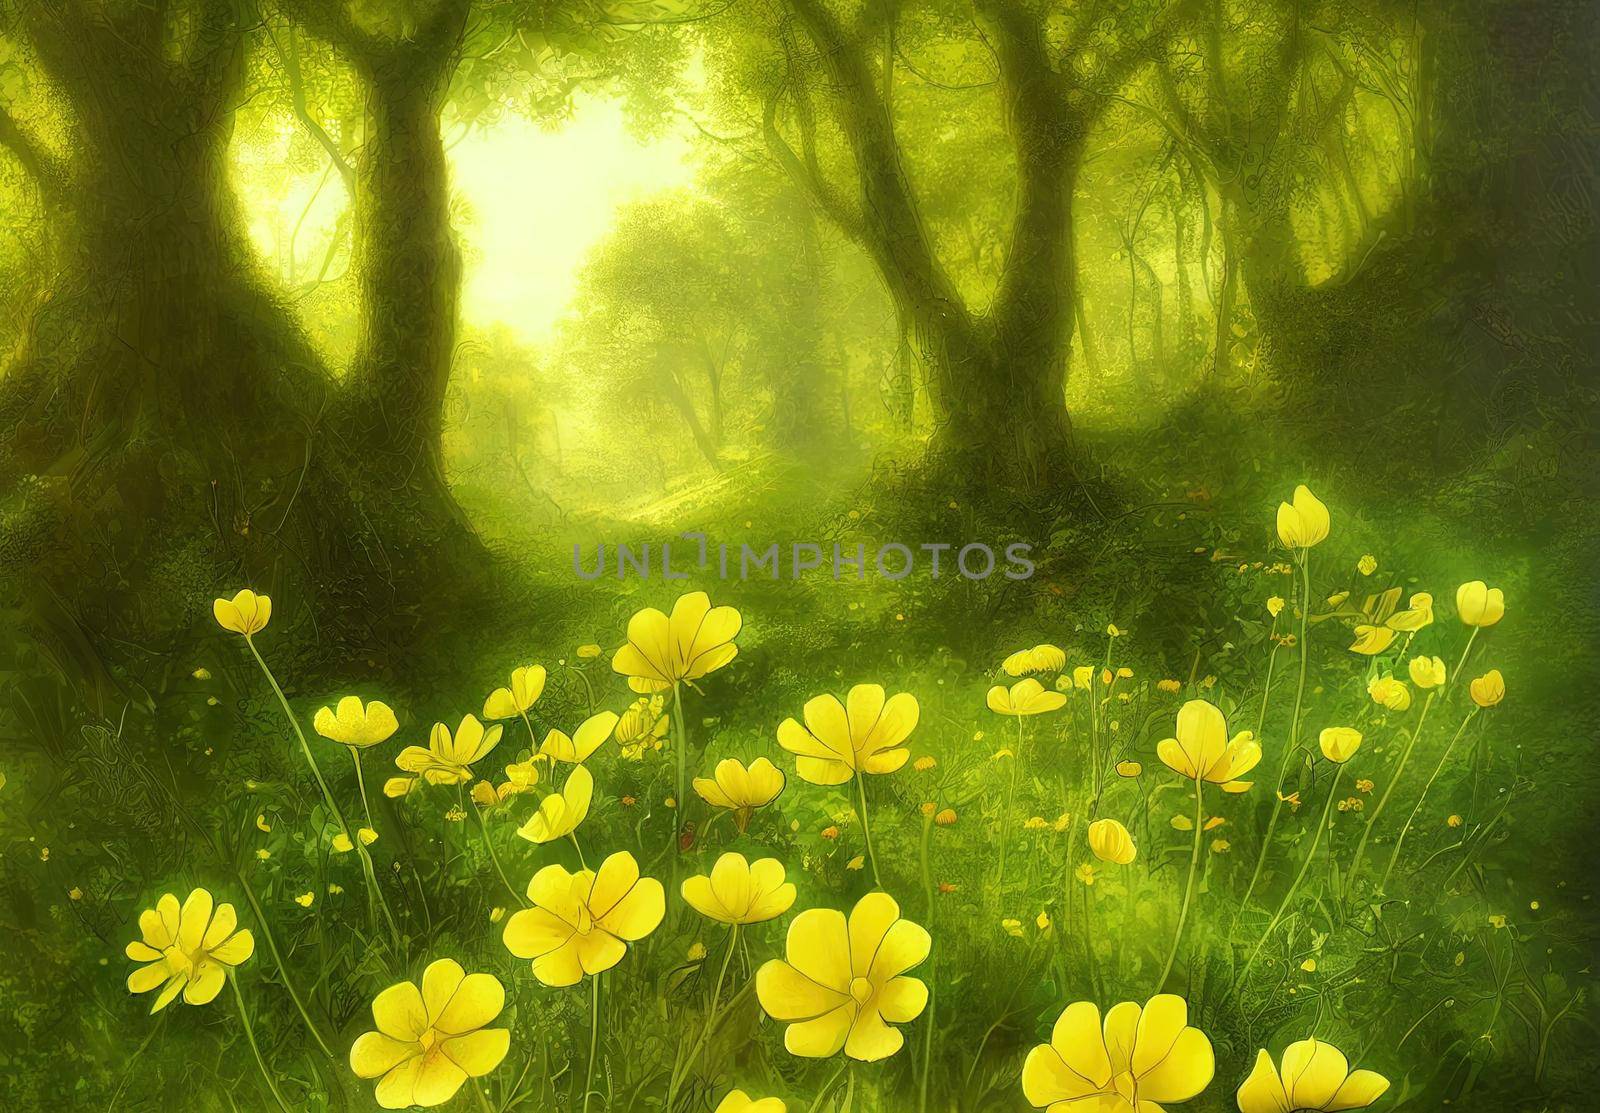 Yellow buttercup flowers with green leaves background in woods by 2ragon